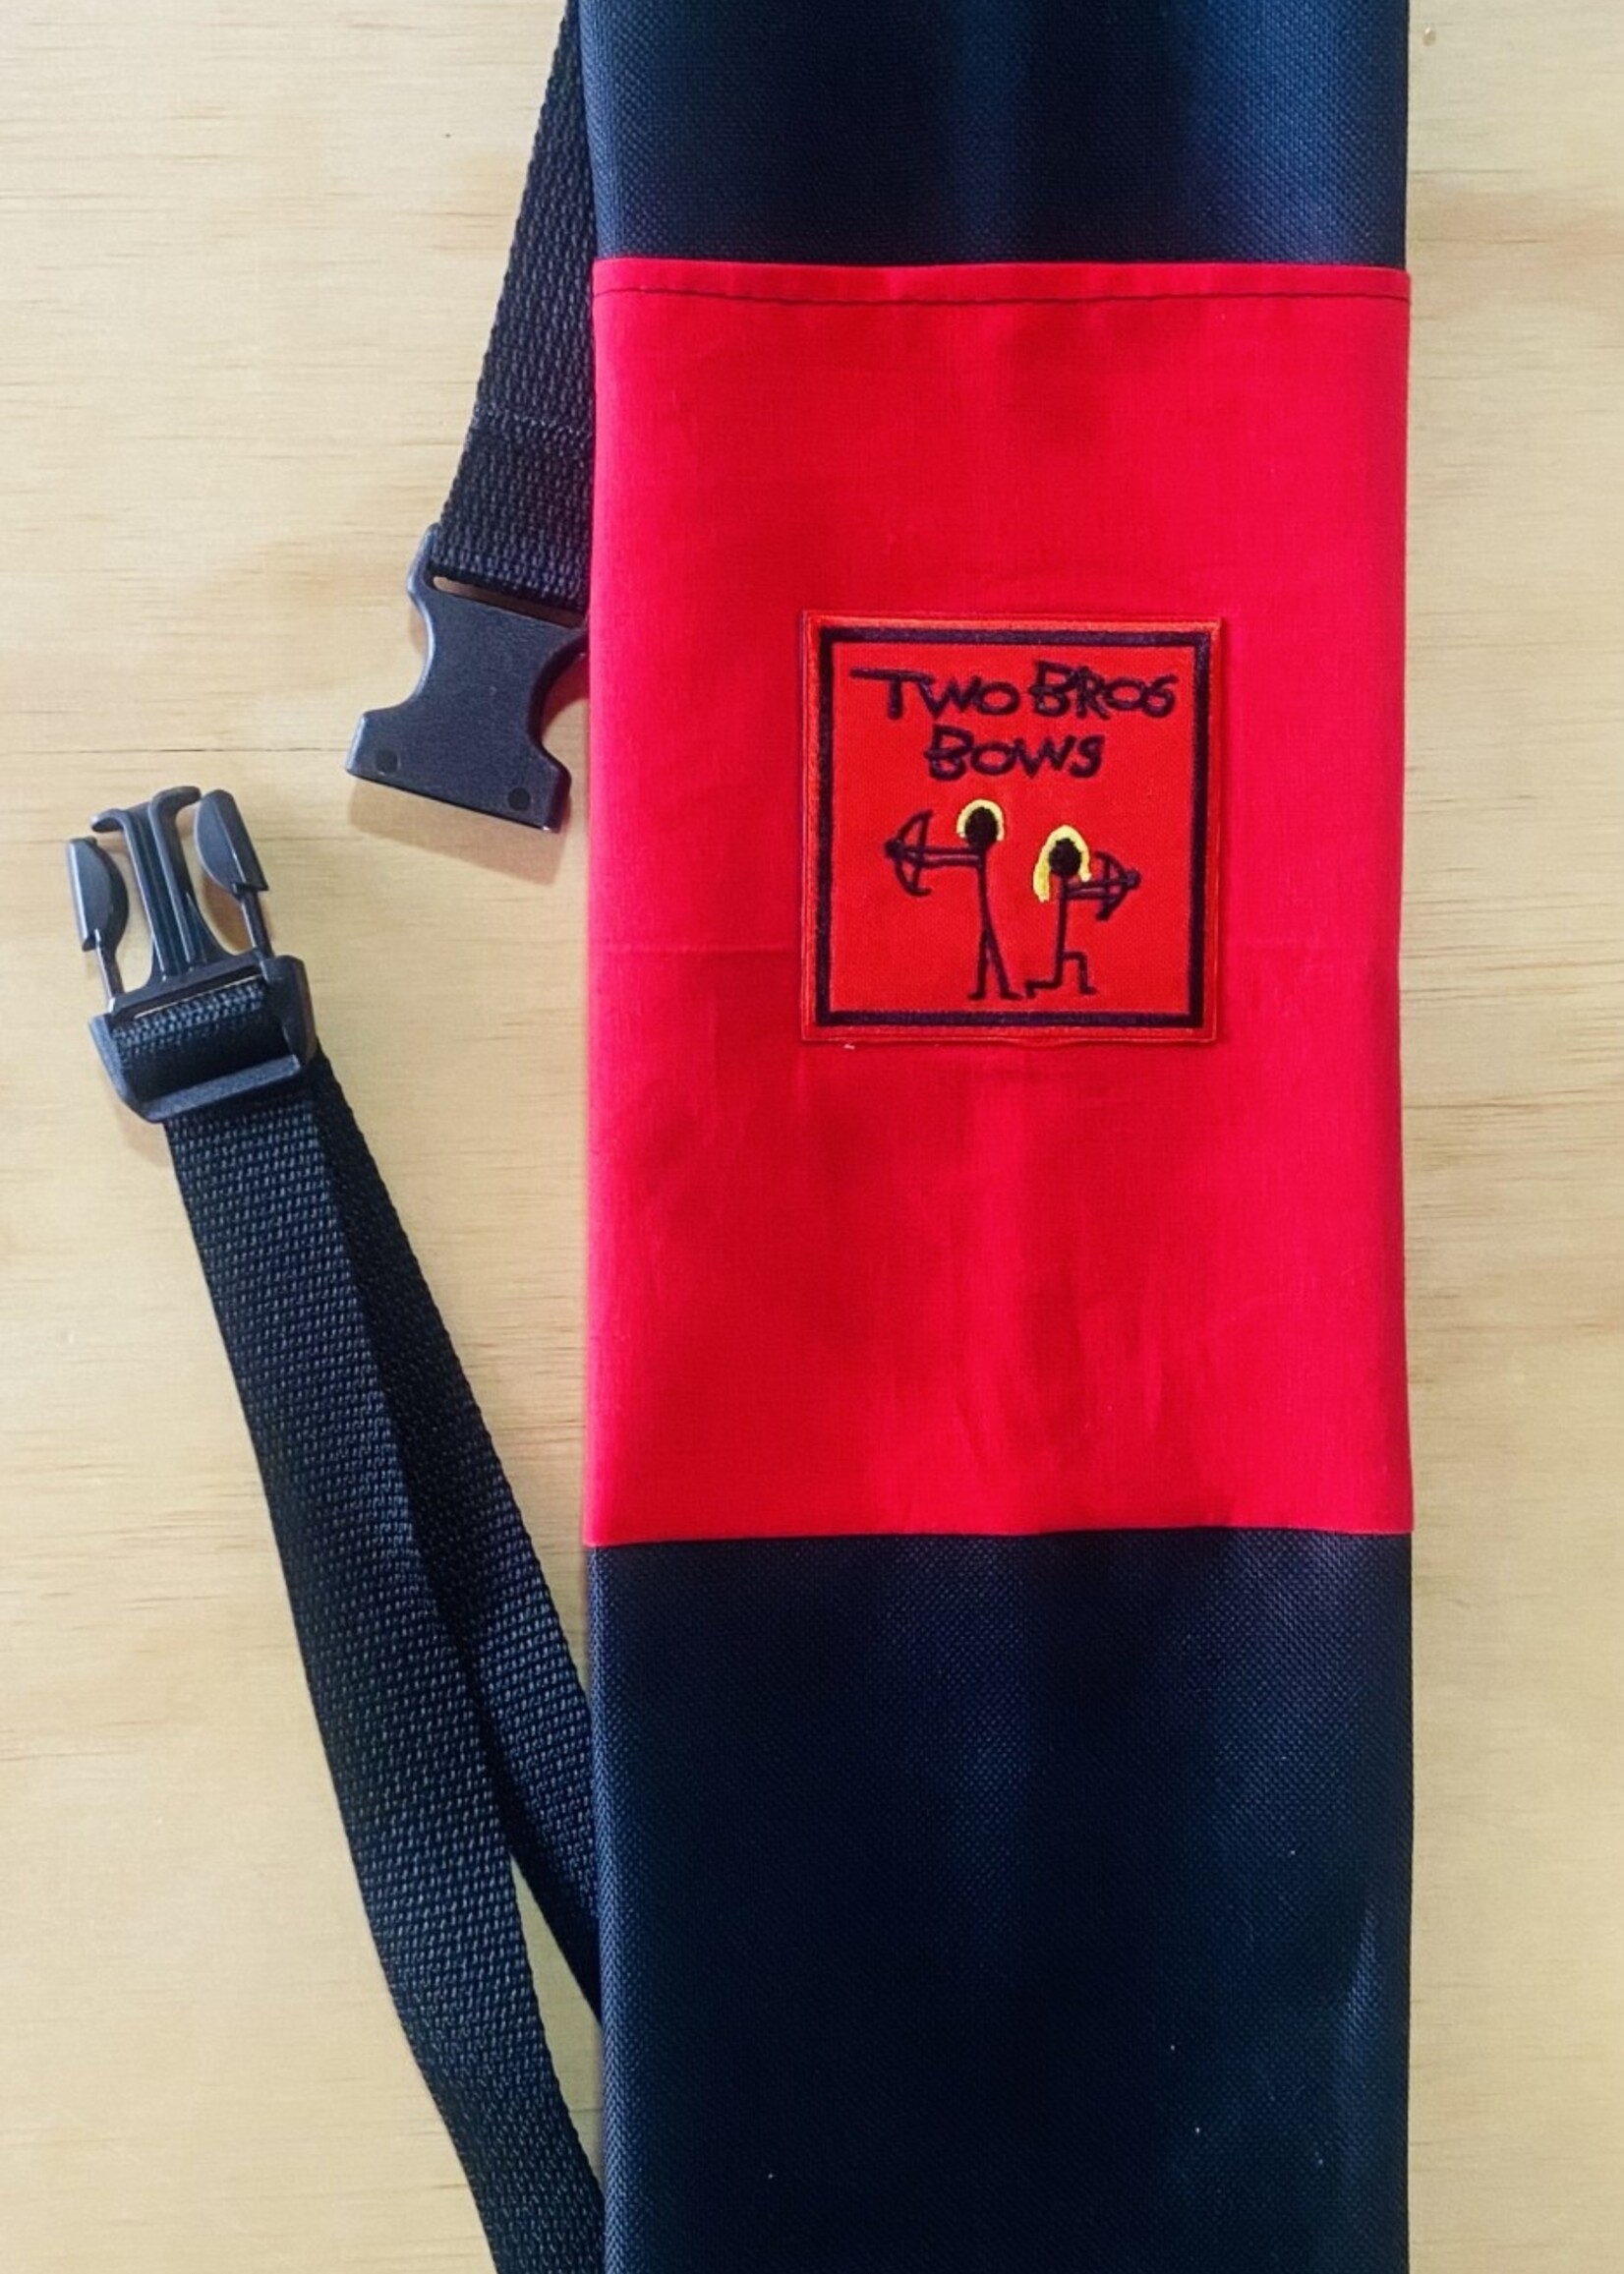 Two Bro's Bows Two Bro’s Bows Quiver Bag - Red